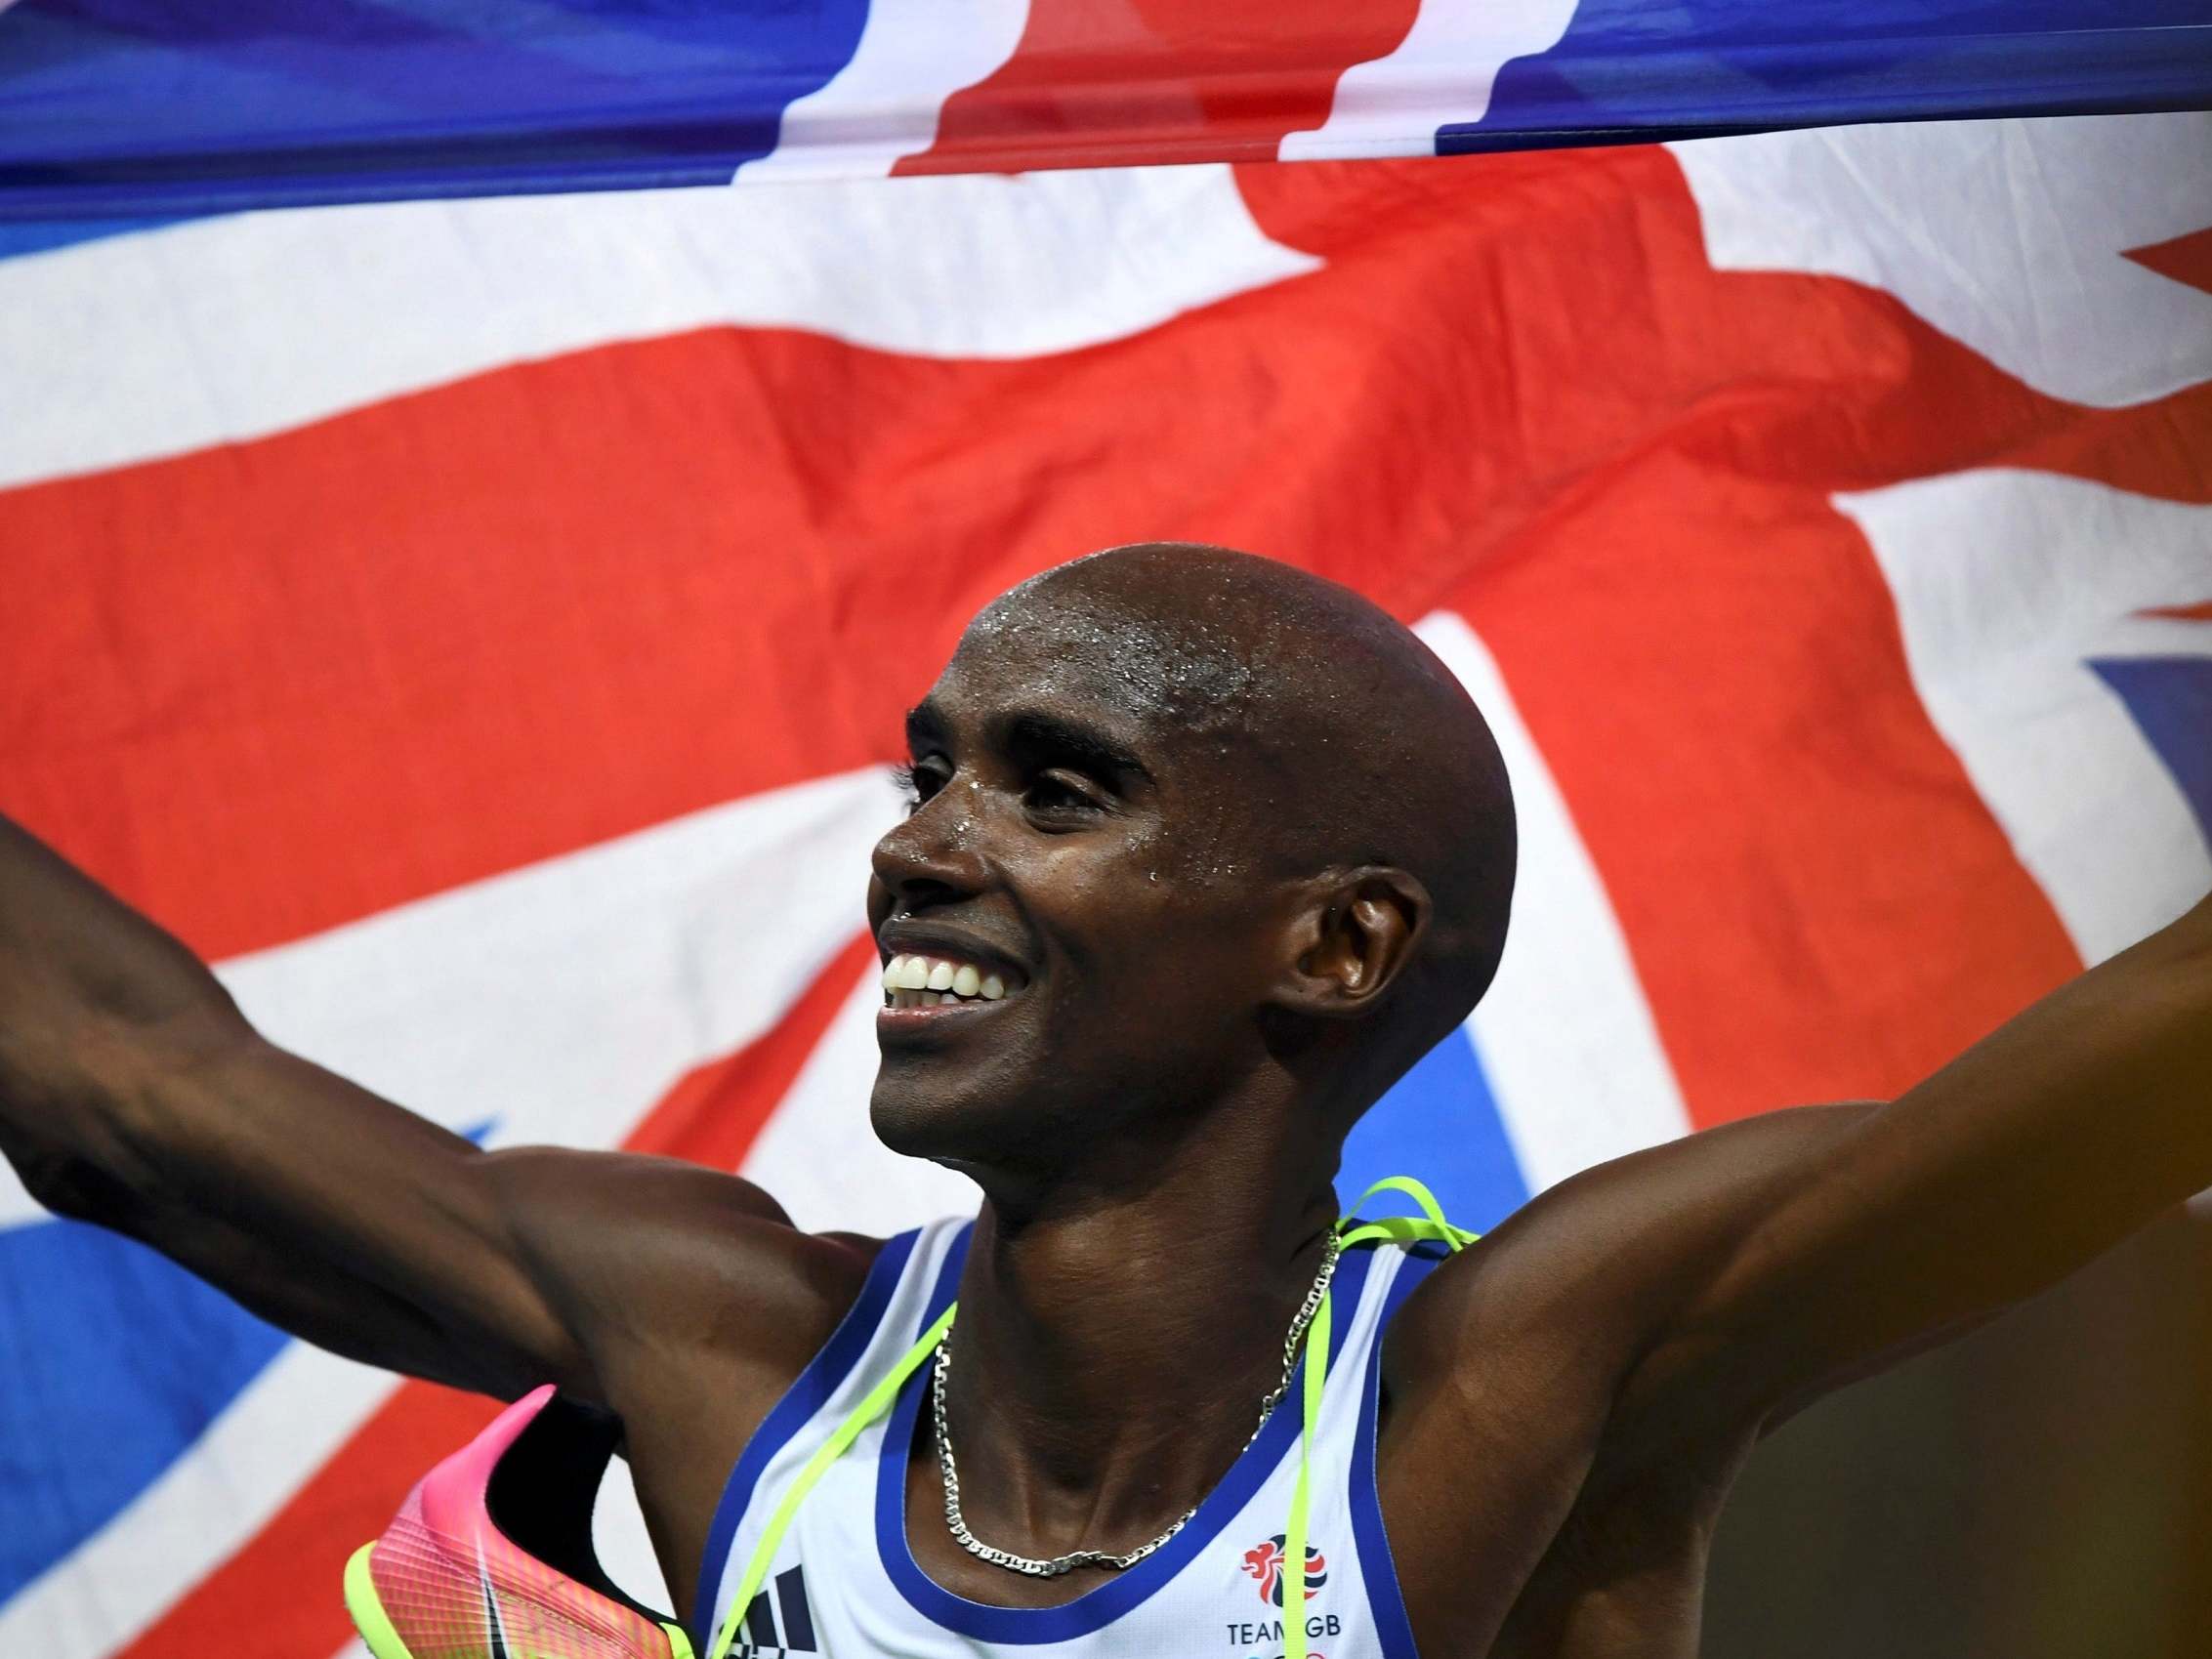 Black trained Farah to his four Olympic gold medals